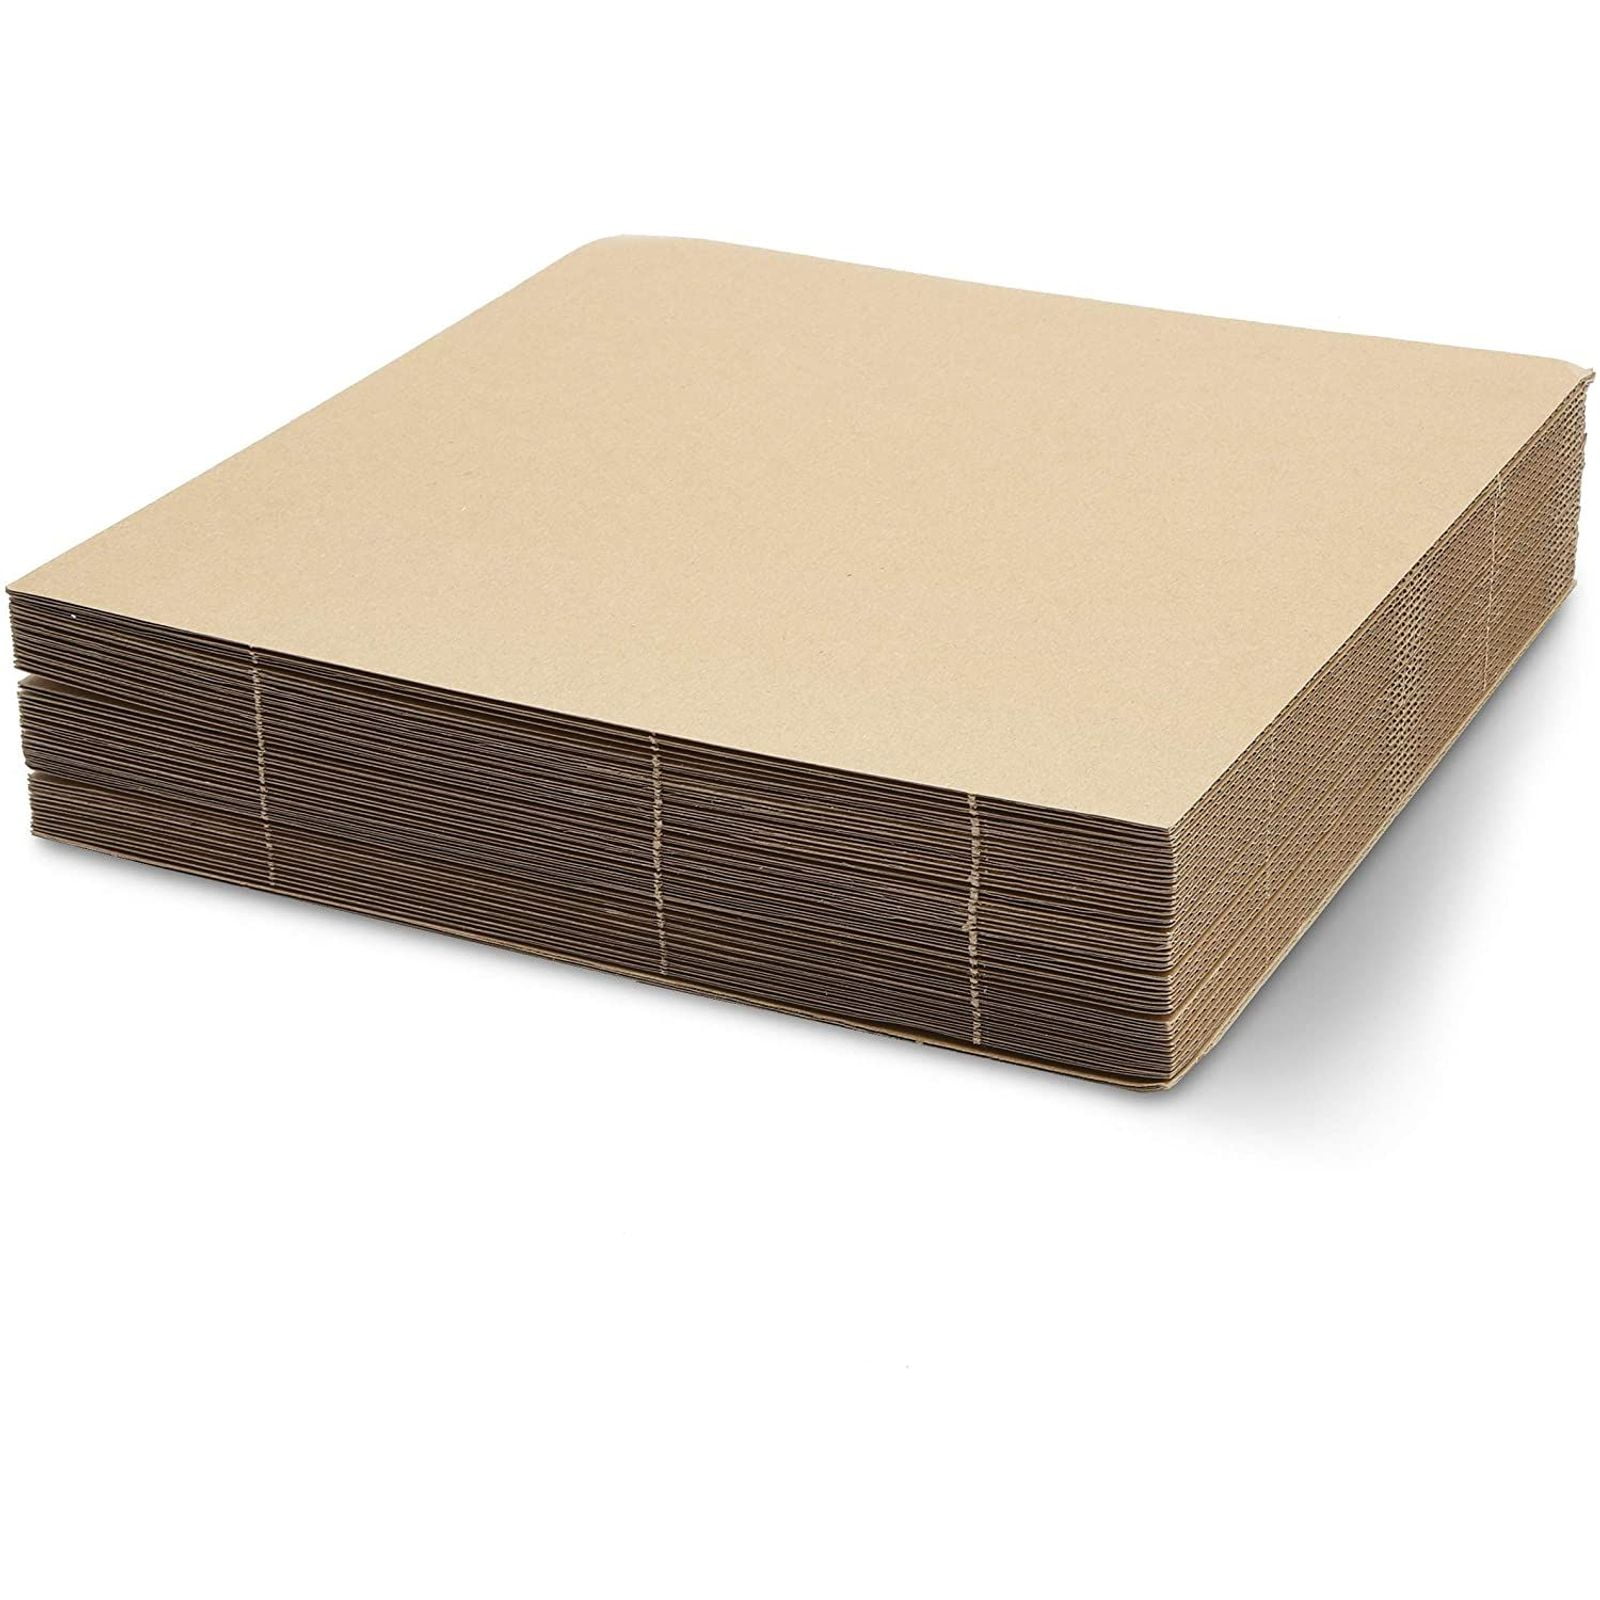 Cardboard Strong White Sturdy All Board Envelopes All Size Mailing Post Cheap UK 